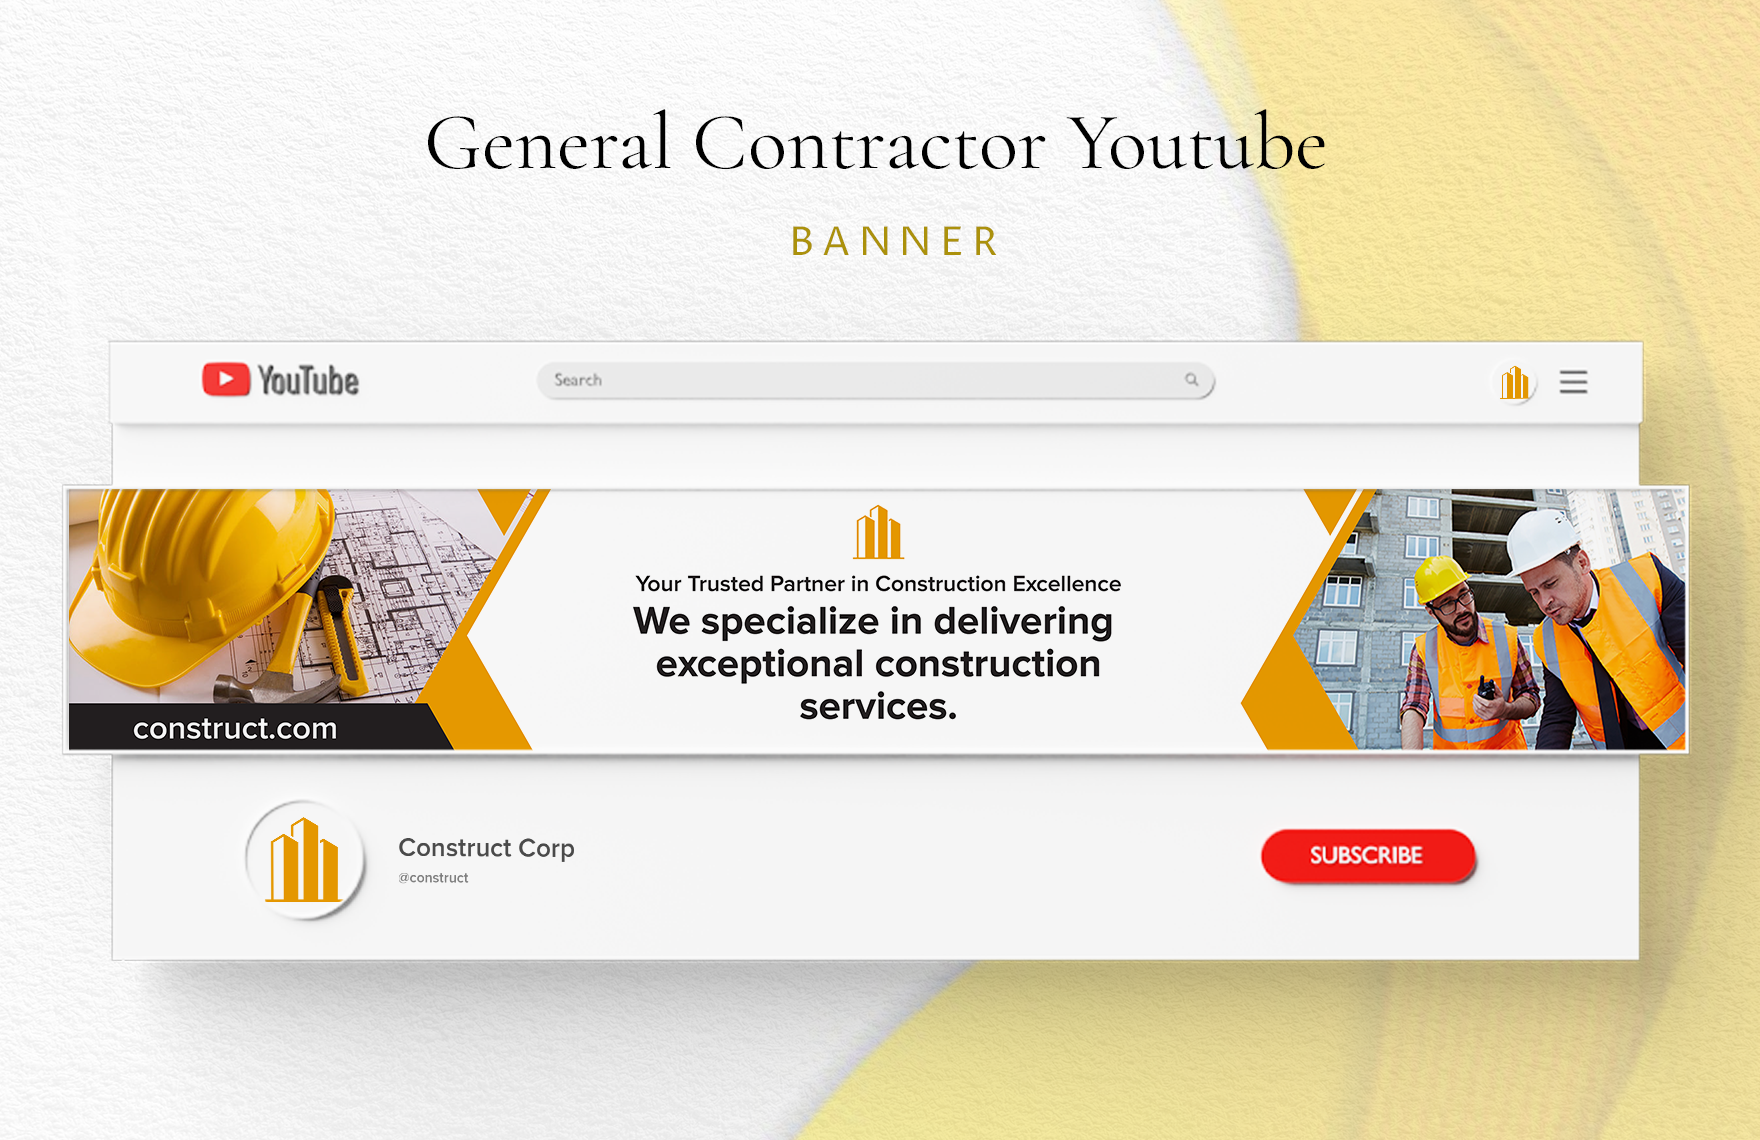 General Contractor Youtube Banner in PDF, Illustrator, PSD, SVG, PNG